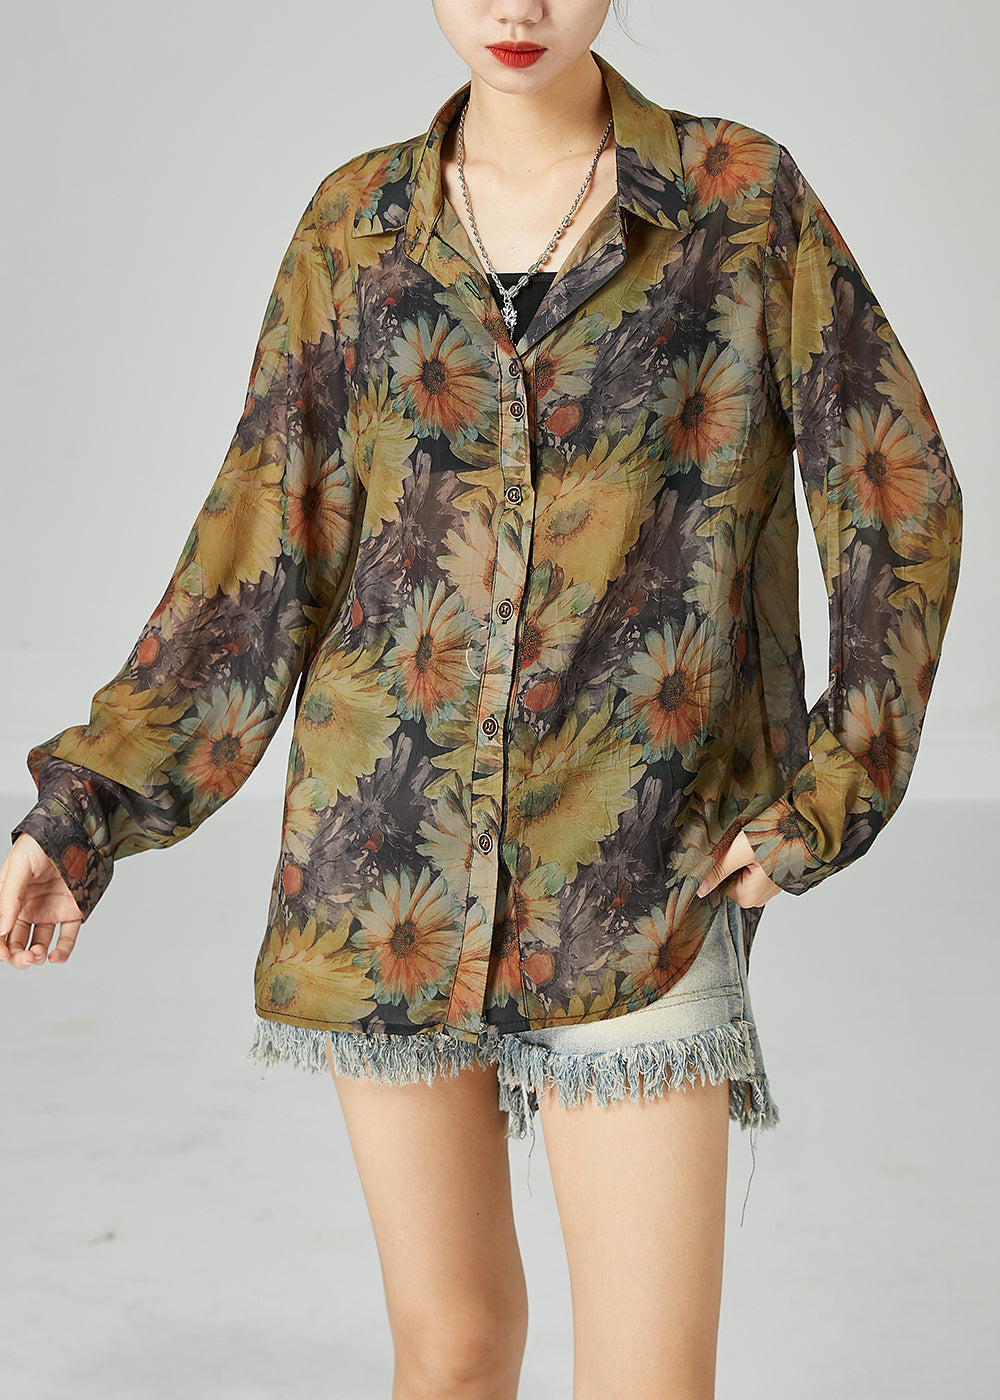 Fitted Khaki Oversized Sunflower Print Cotton Shirt Top Spring LY2443